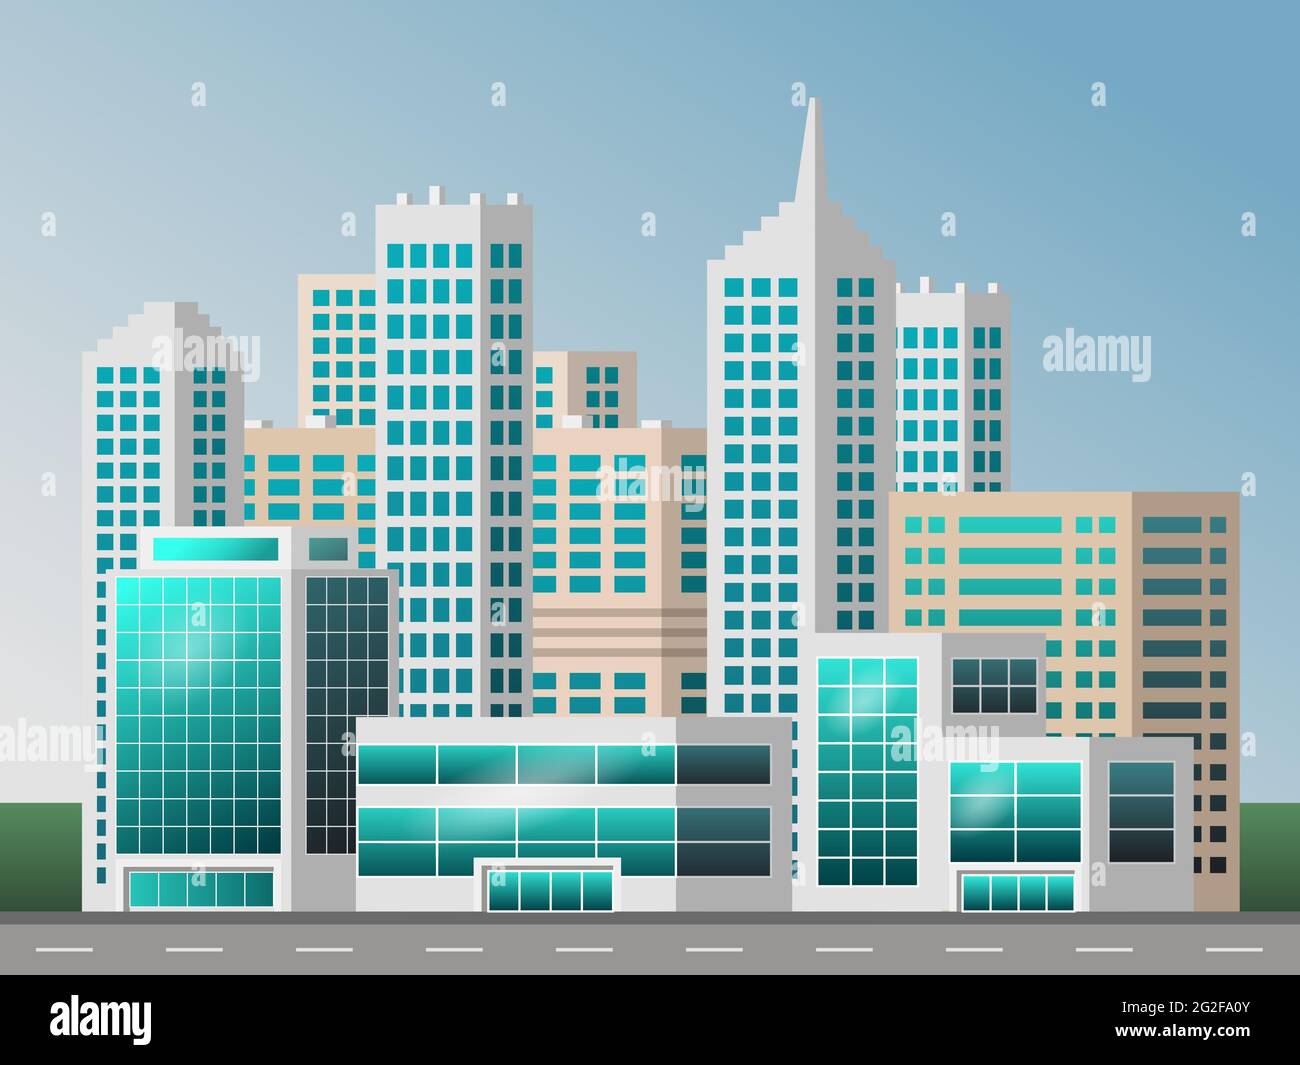 Urban landscape with big modern buildings. Smart city, business center, skyscraper houses. For cityscape background, concept or metropolis scene. Flat Stock Vector